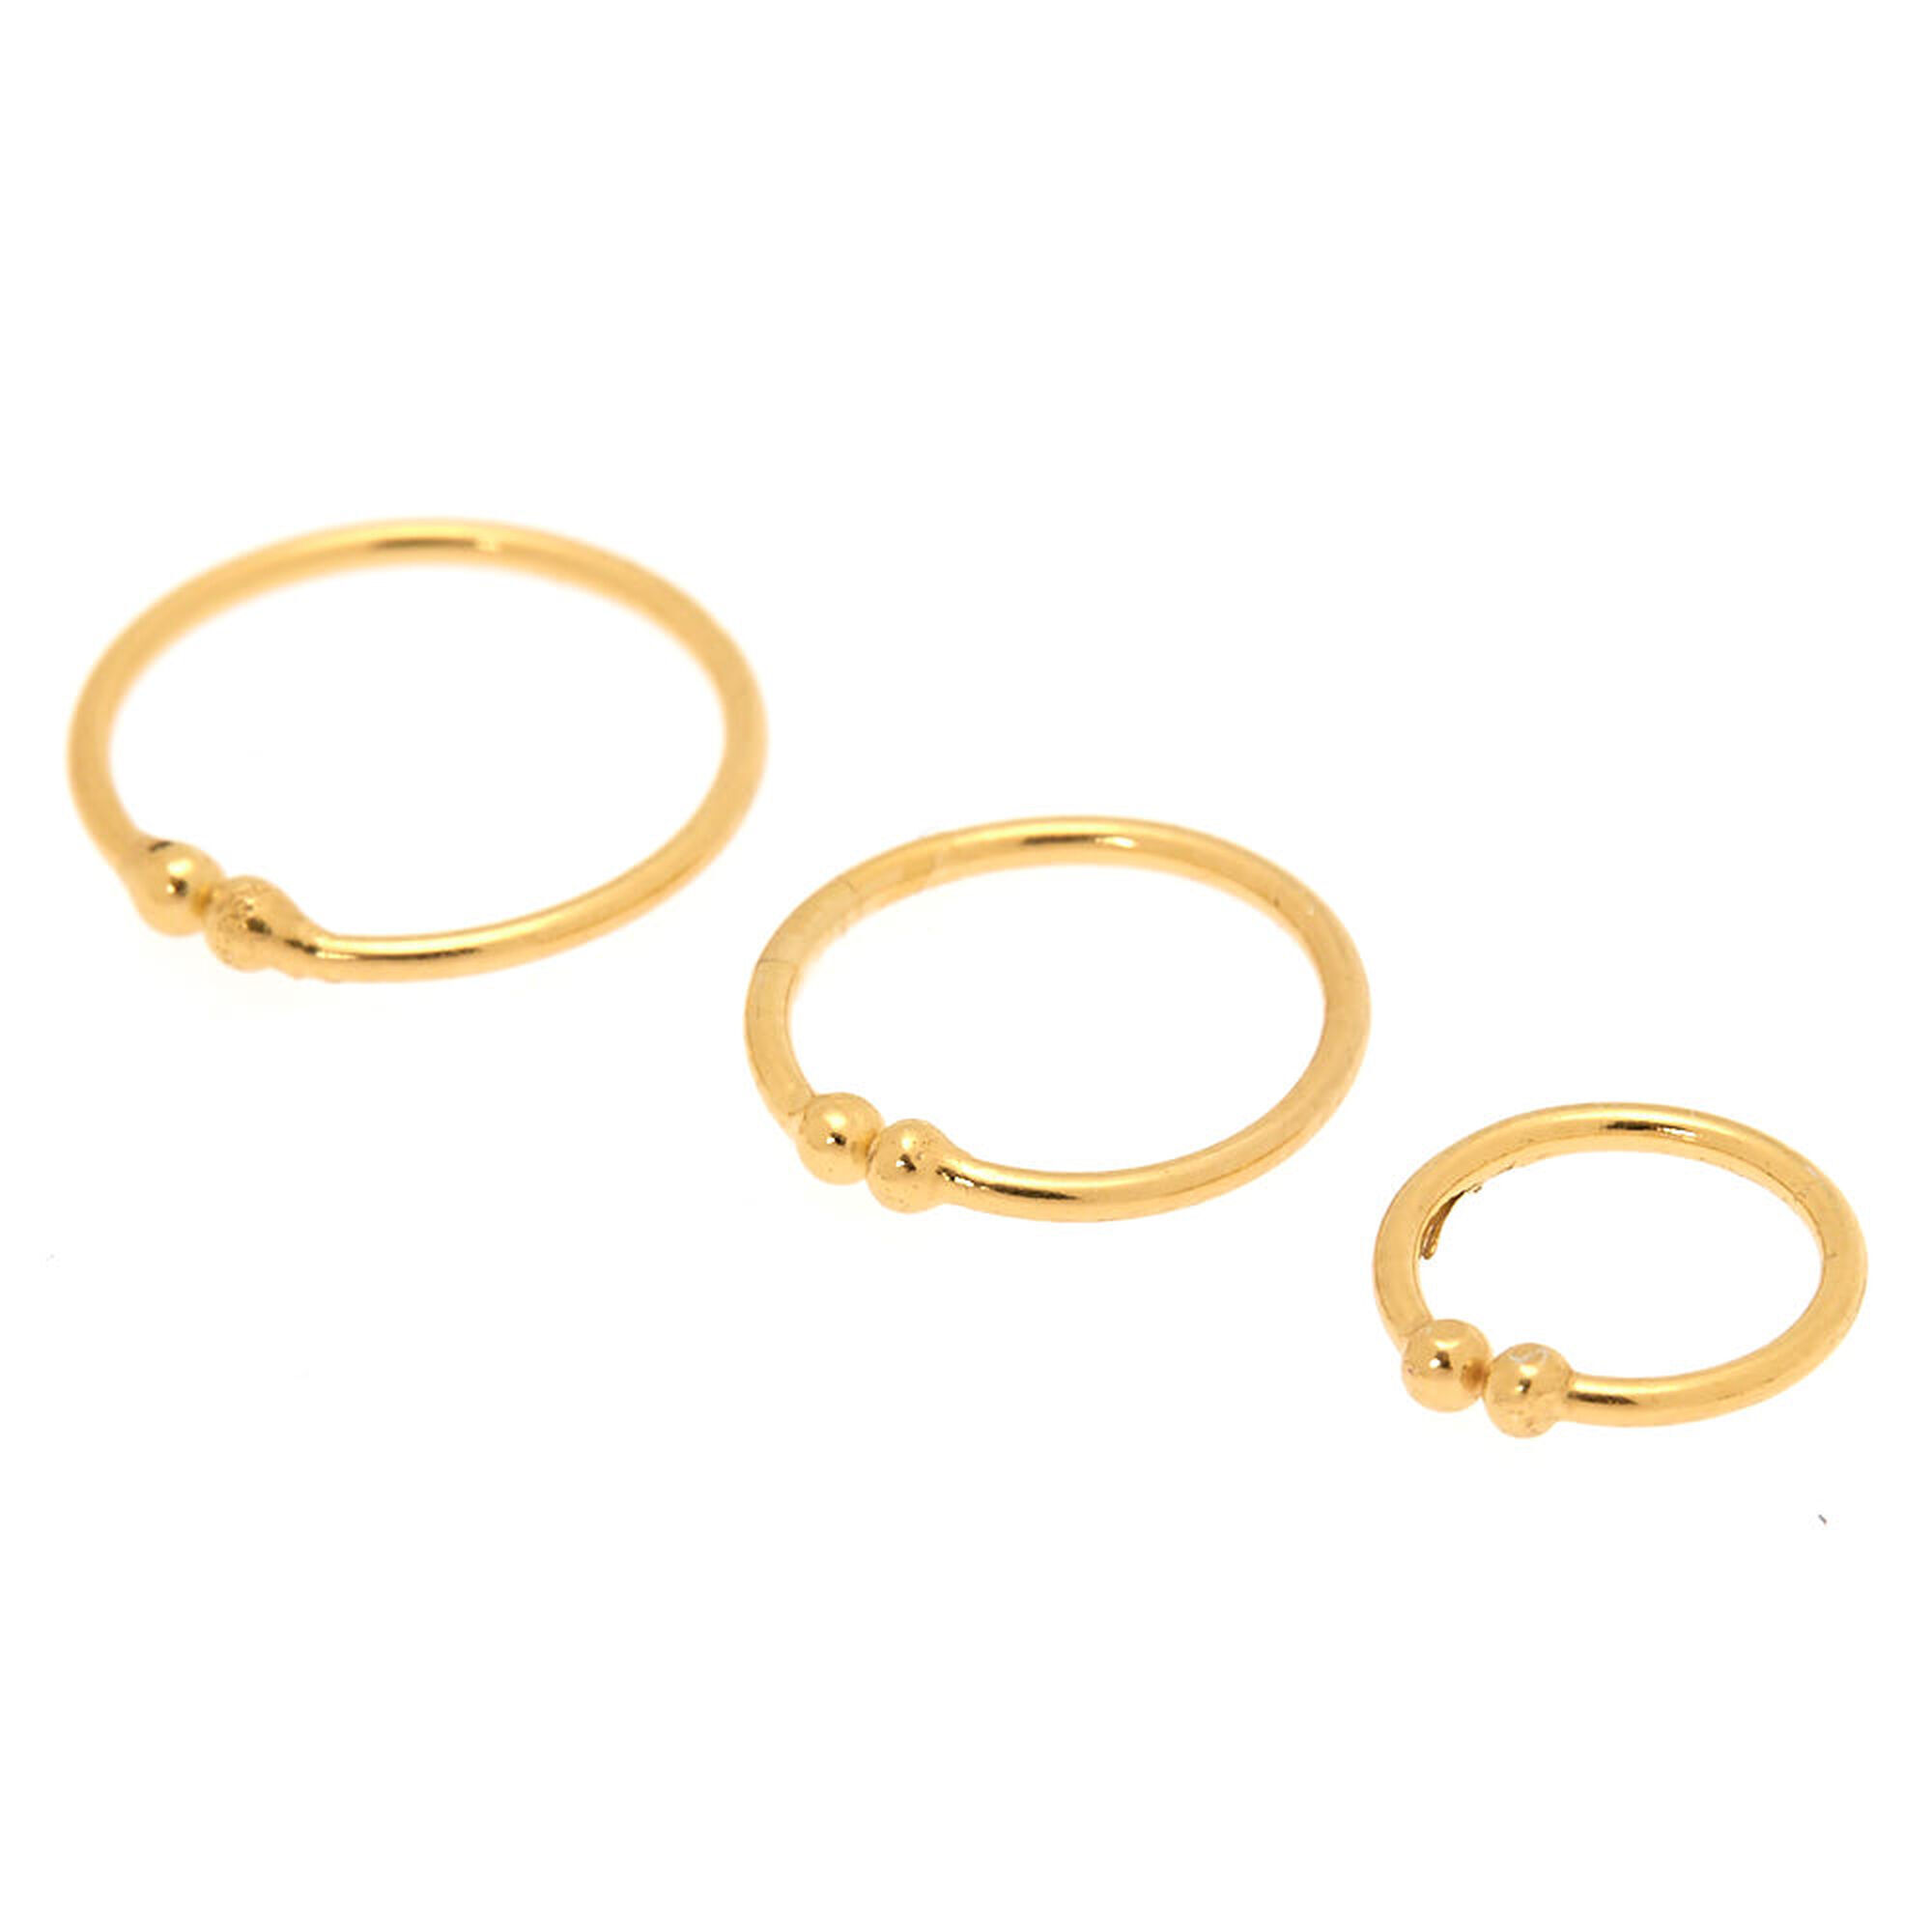 View Claires Sterling Silver Faux Nose Rings 3 Pack Gold information